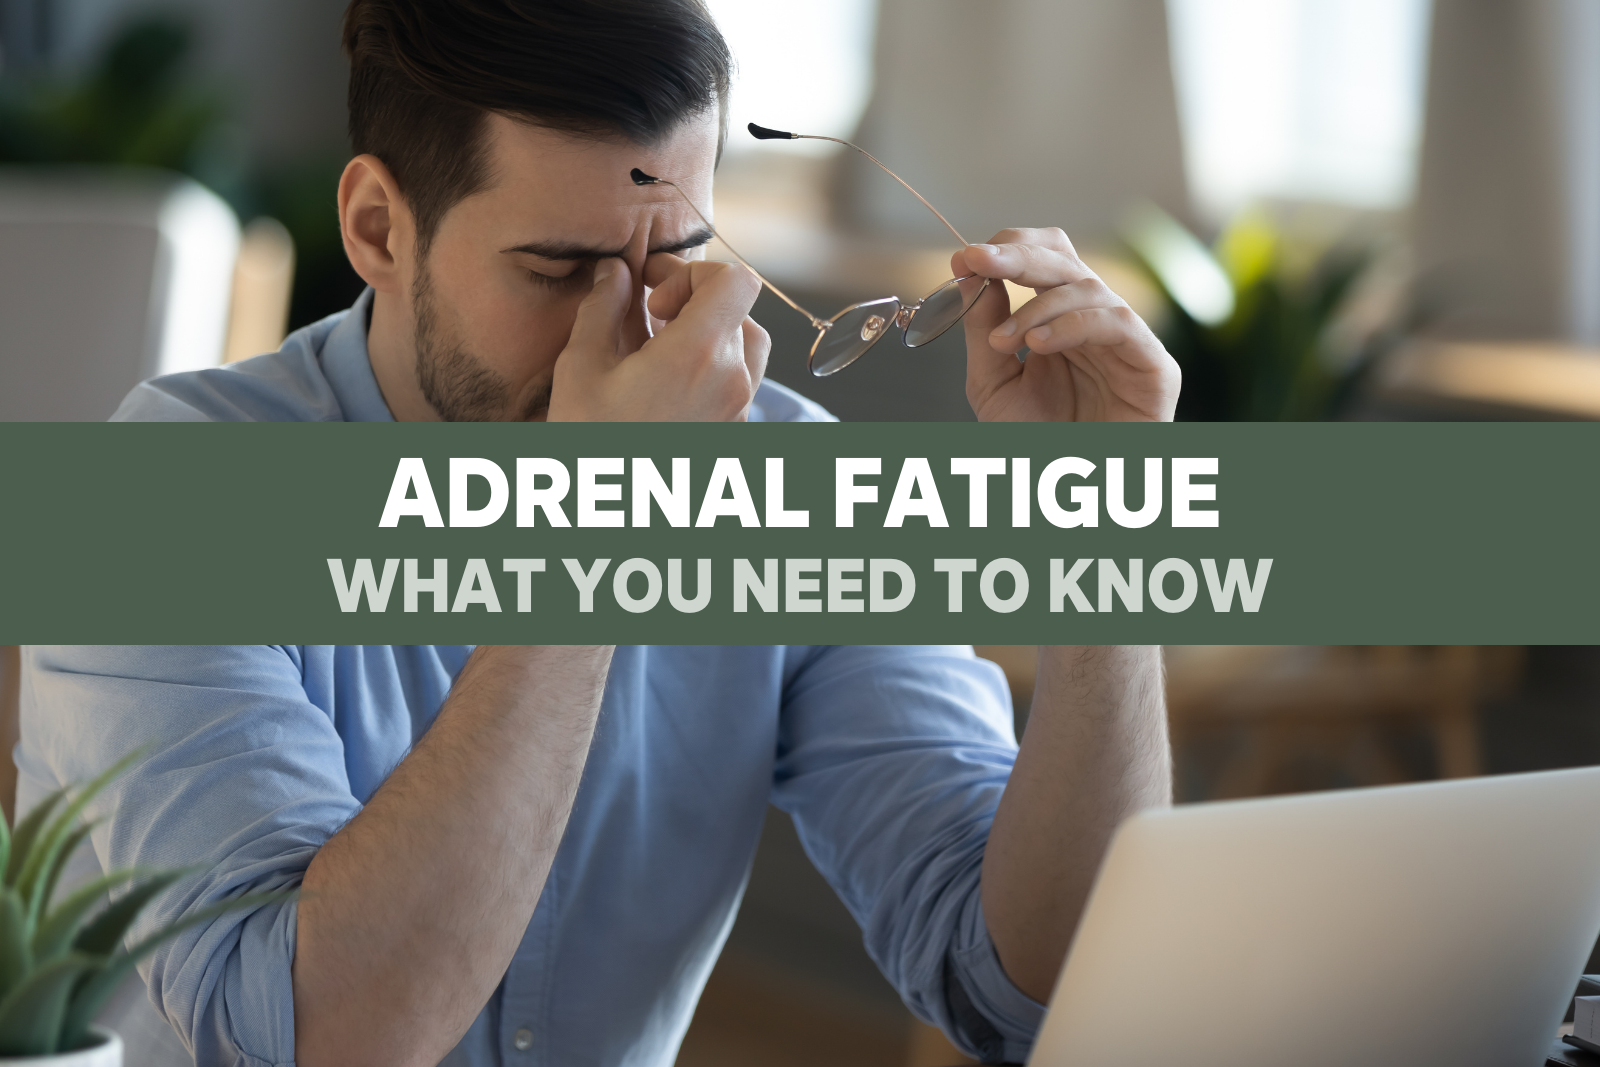 Adrenal Fatigue: What You Need to Know